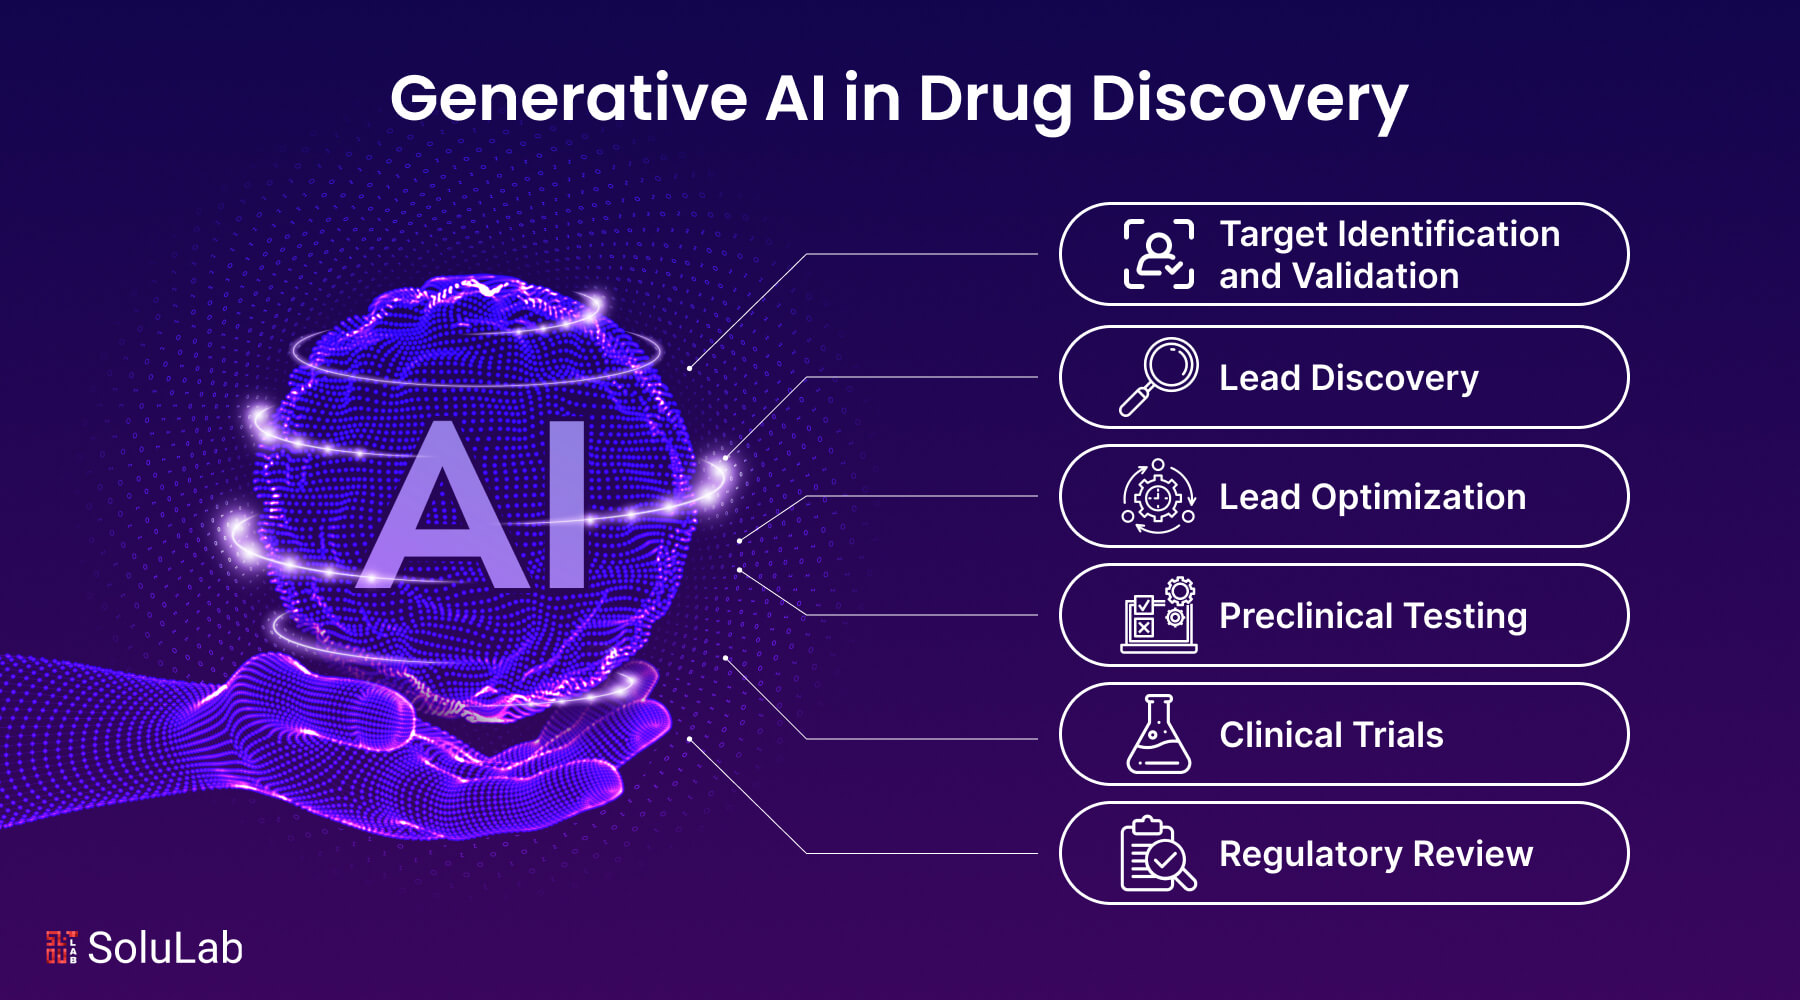 GenAI in Drug Discovery